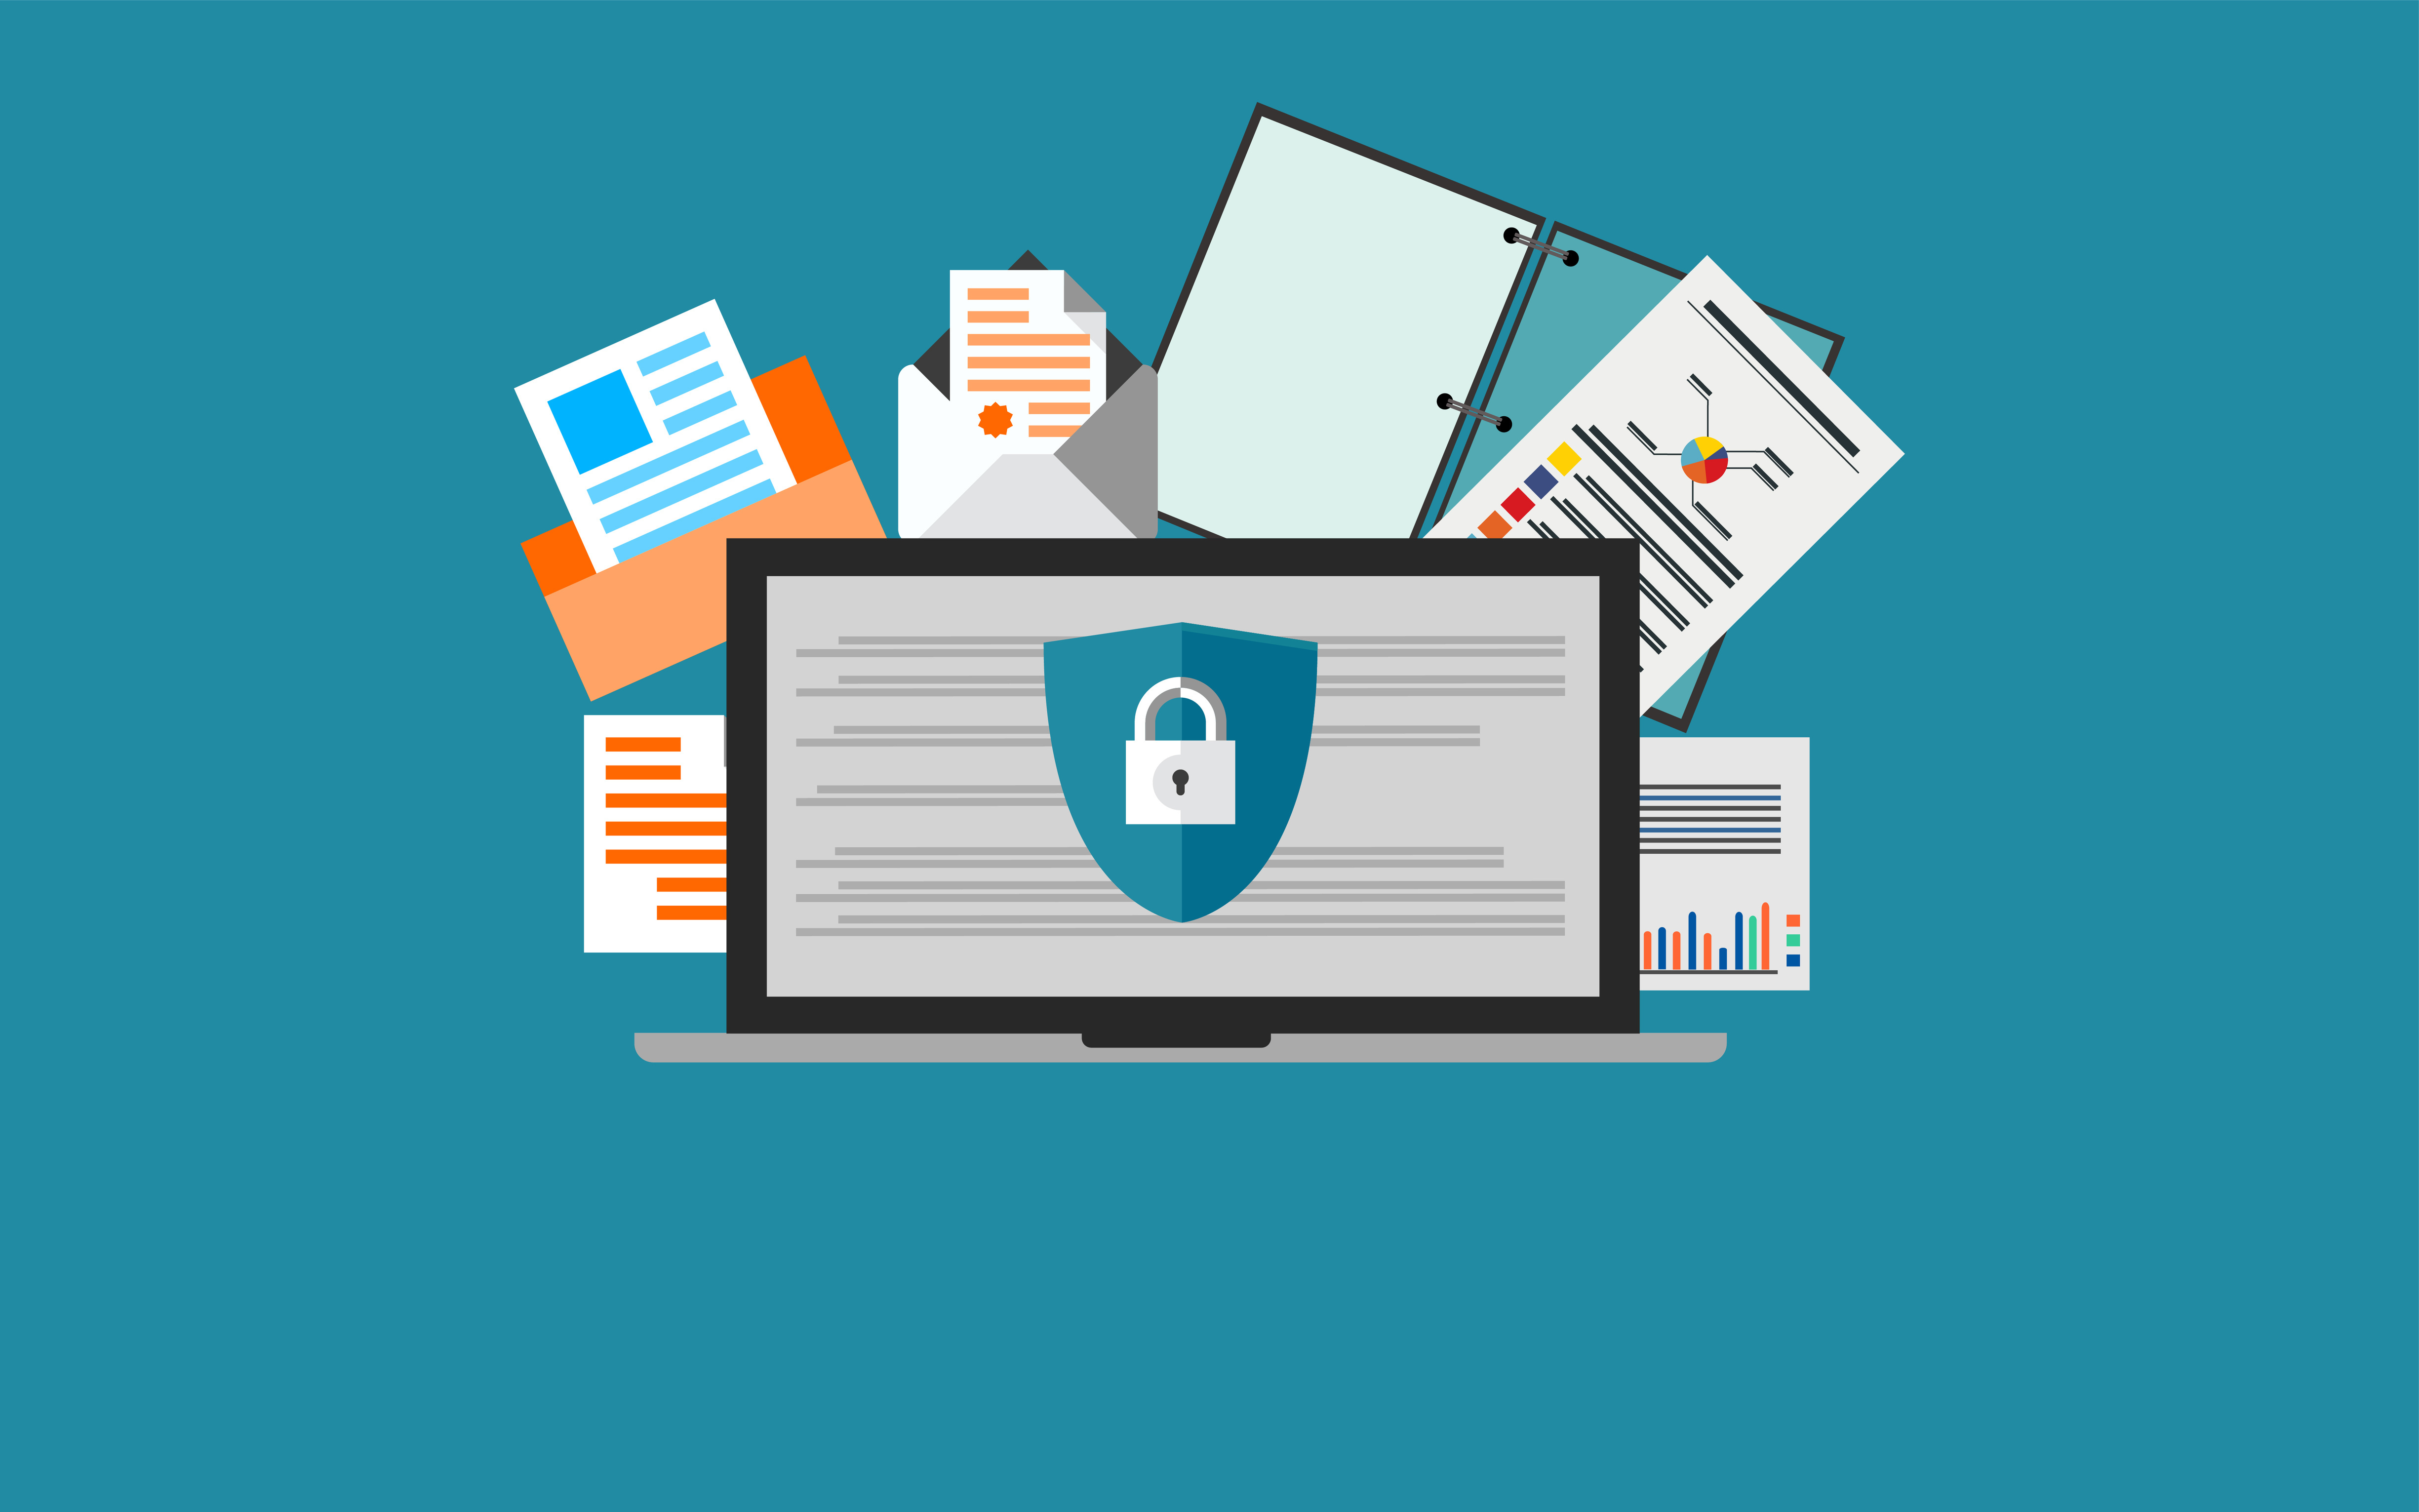 The Best Recommendations to Help Protect Your HOA's Sensitive Data